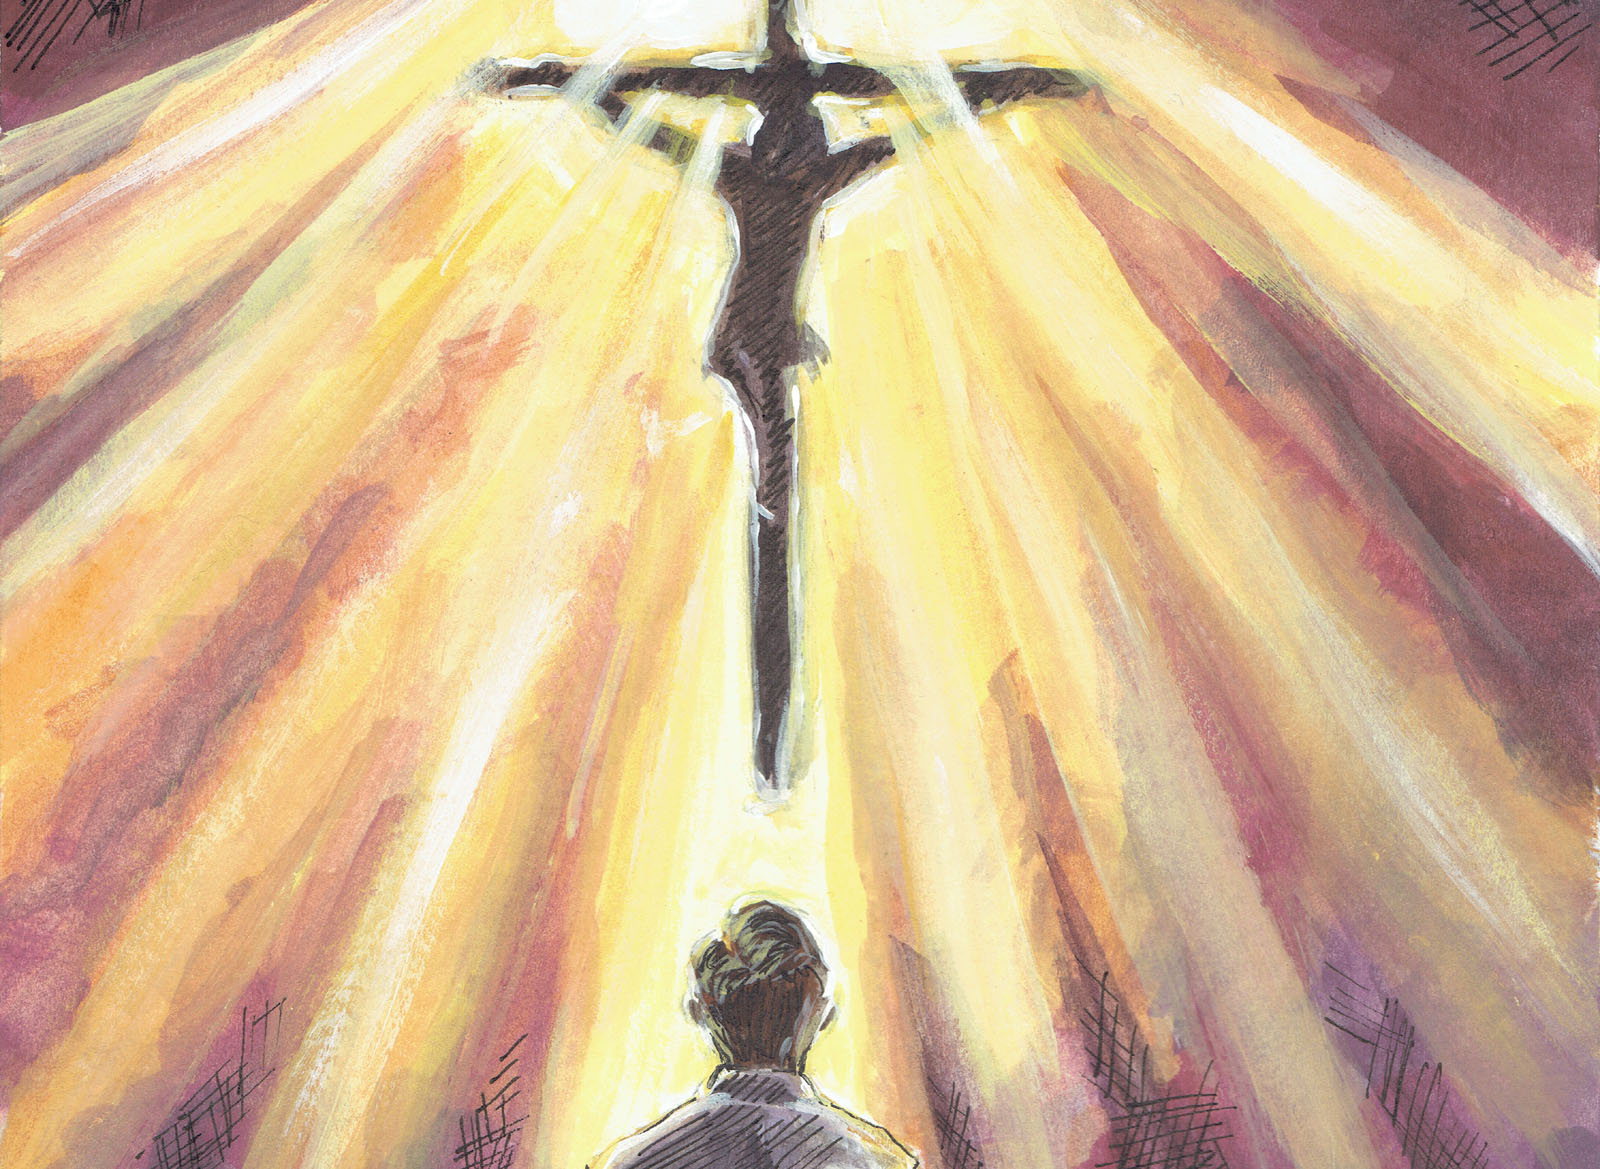 You radiated heavenly glory yet spoke of Your coming Passion. The cross is Your love revealed, not an obstacle in Your path. Help me sacrificially live my love for You.